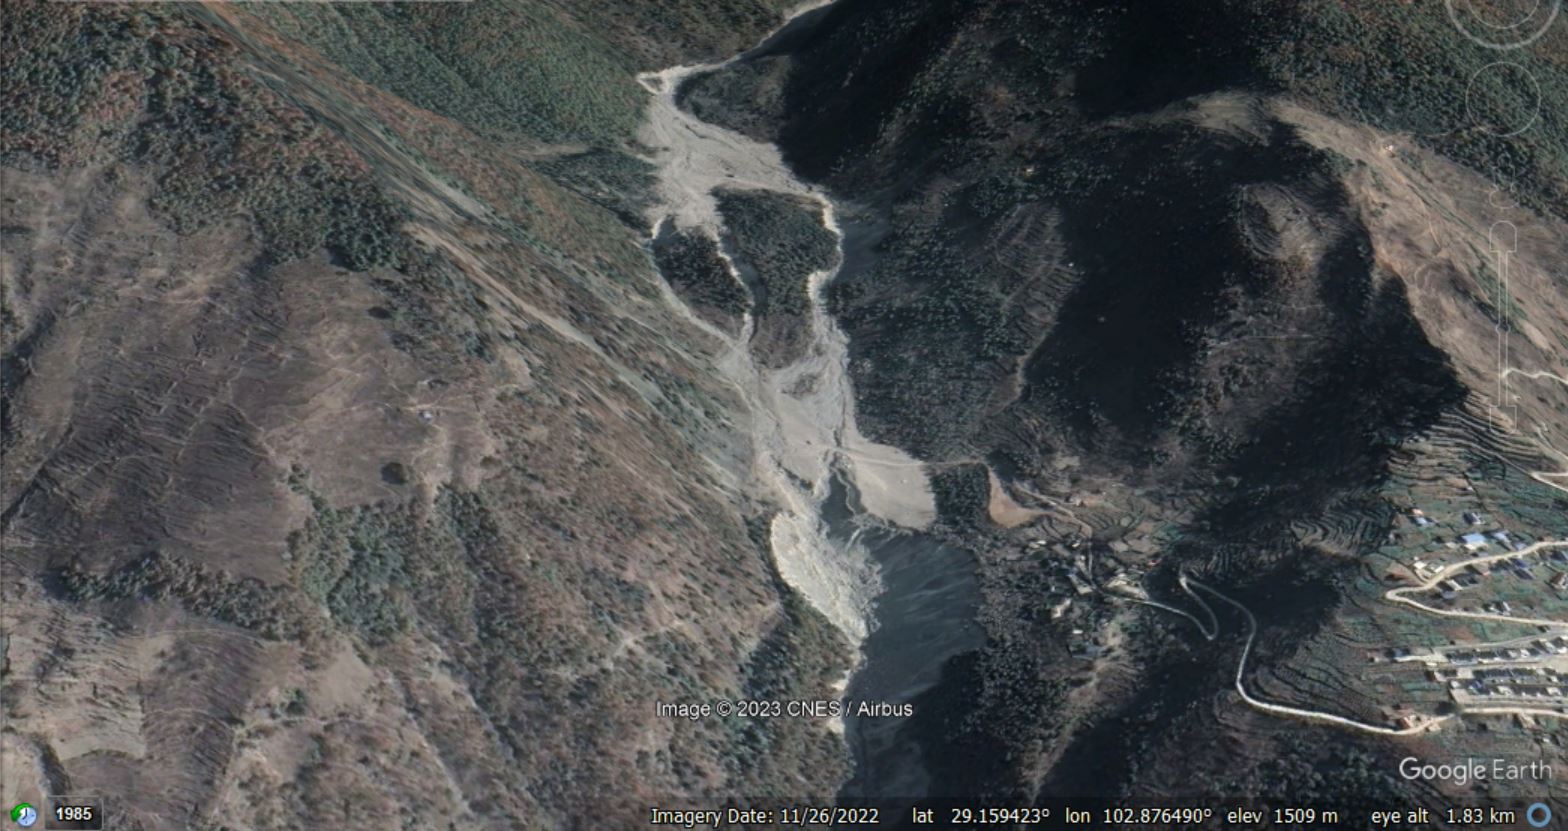 Google Earth image of the aftermath of the Azijue debris flow, showing the two plateaus in the channel, collected in November 2022.